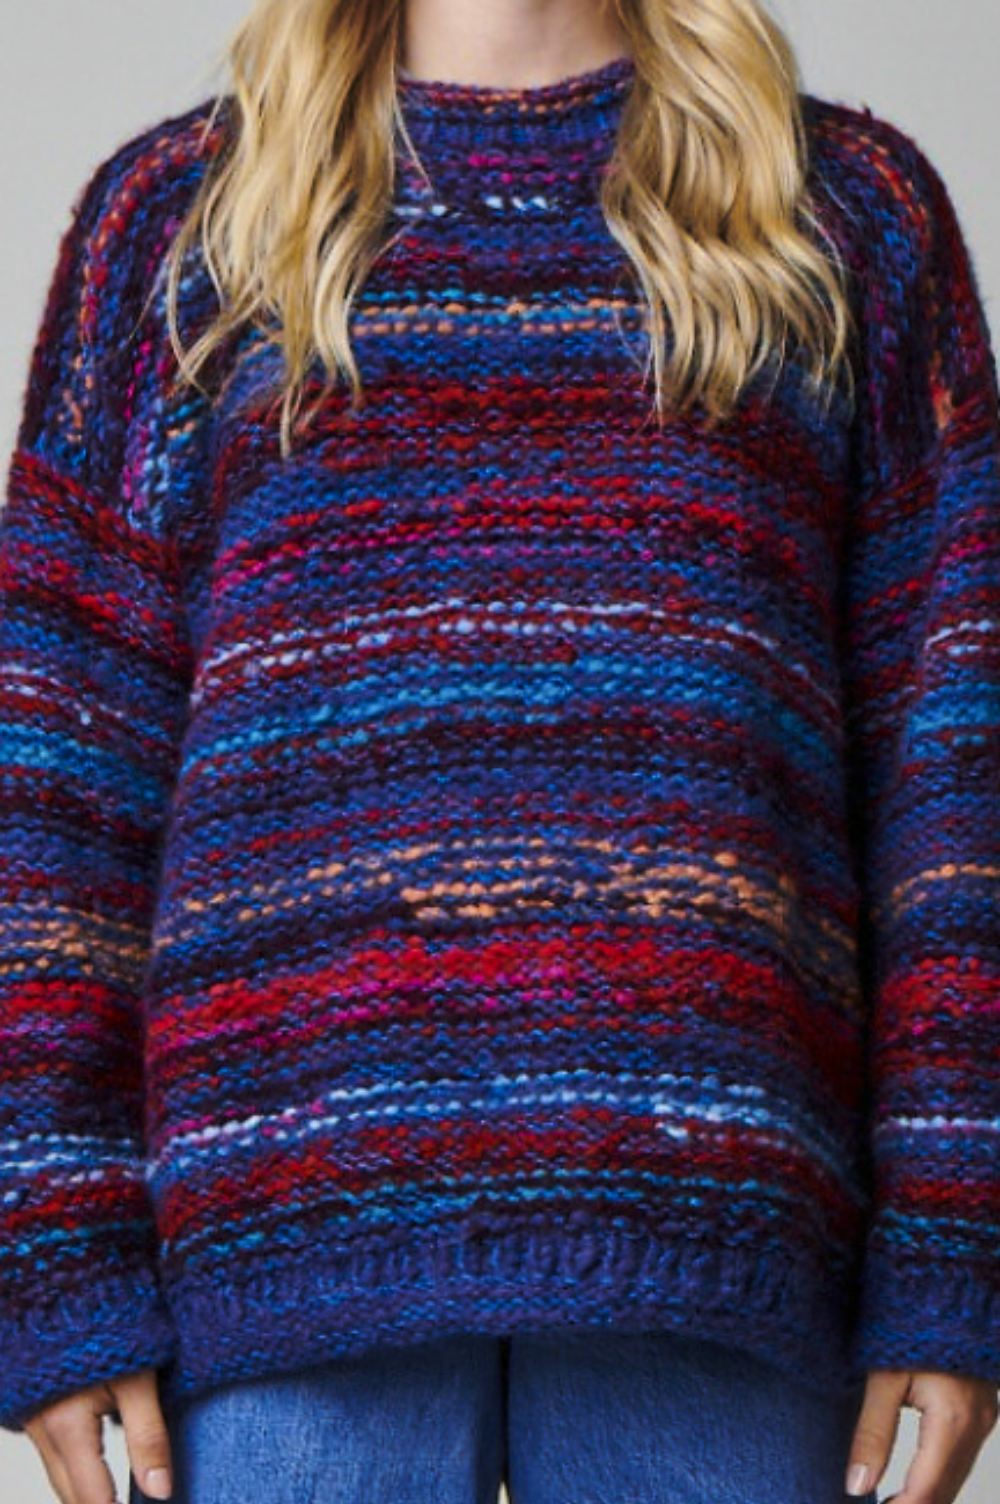 whitby womens alpaca jumper sweater purple red blue close up